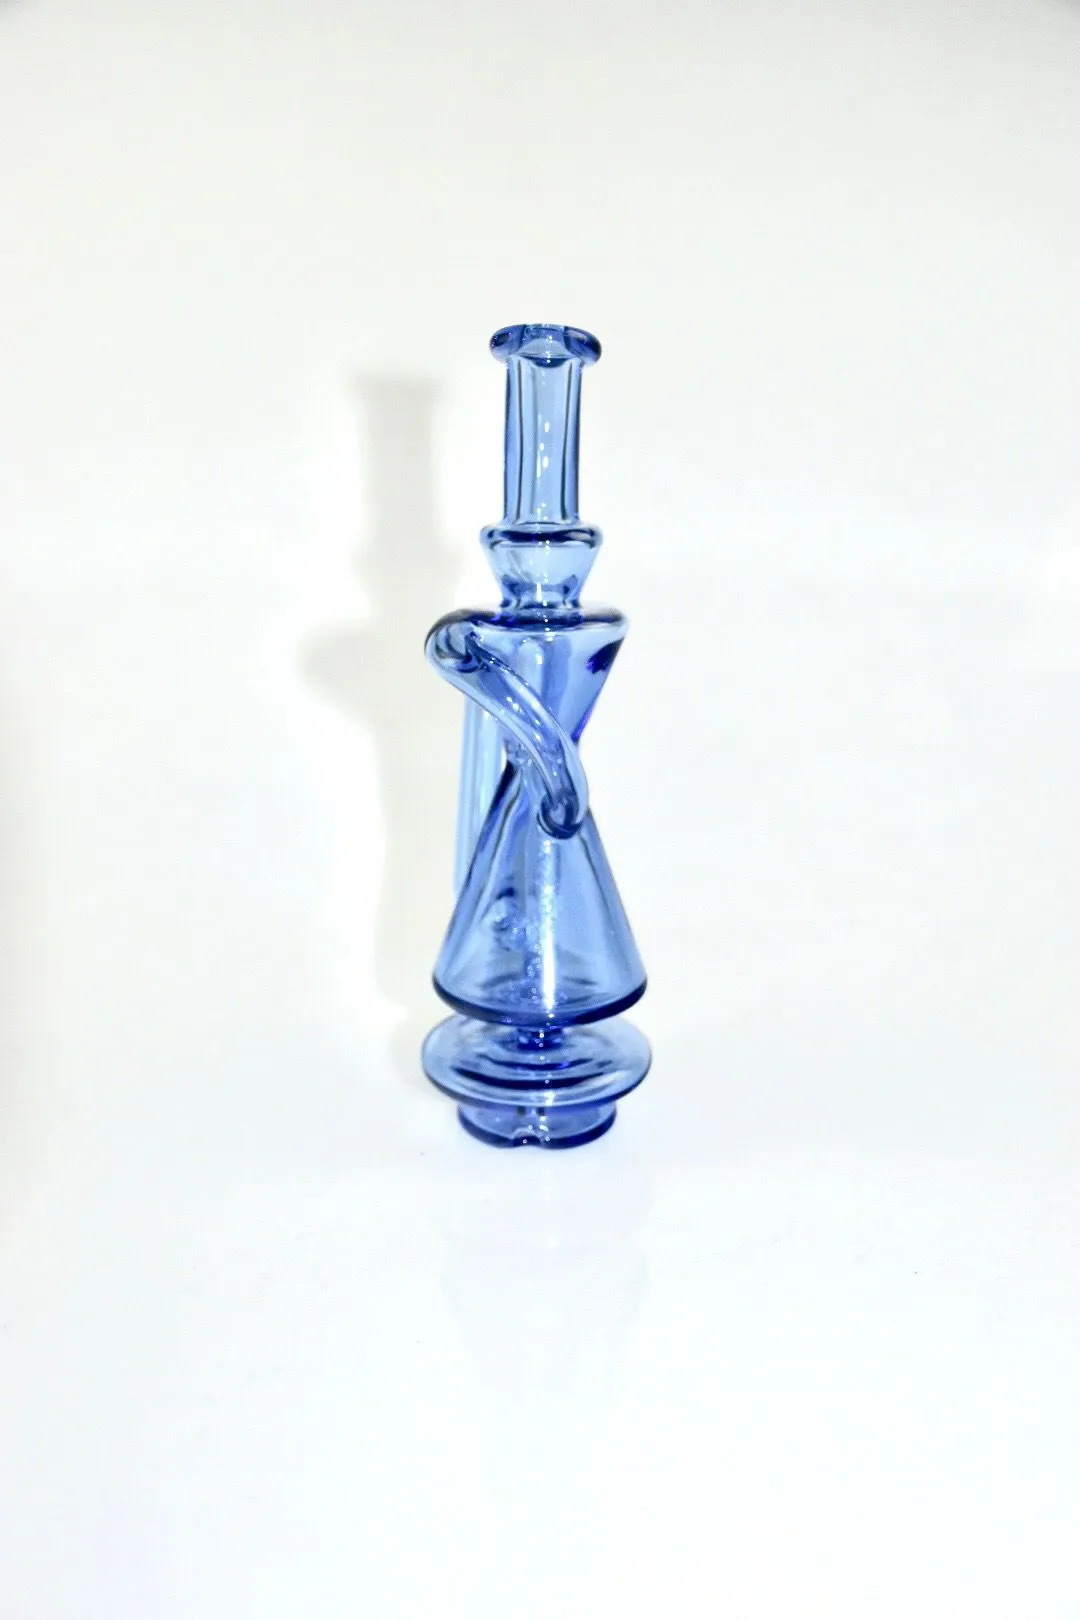 Carta and peak Recycler Glass Bong, blue hookah, 14mm connector